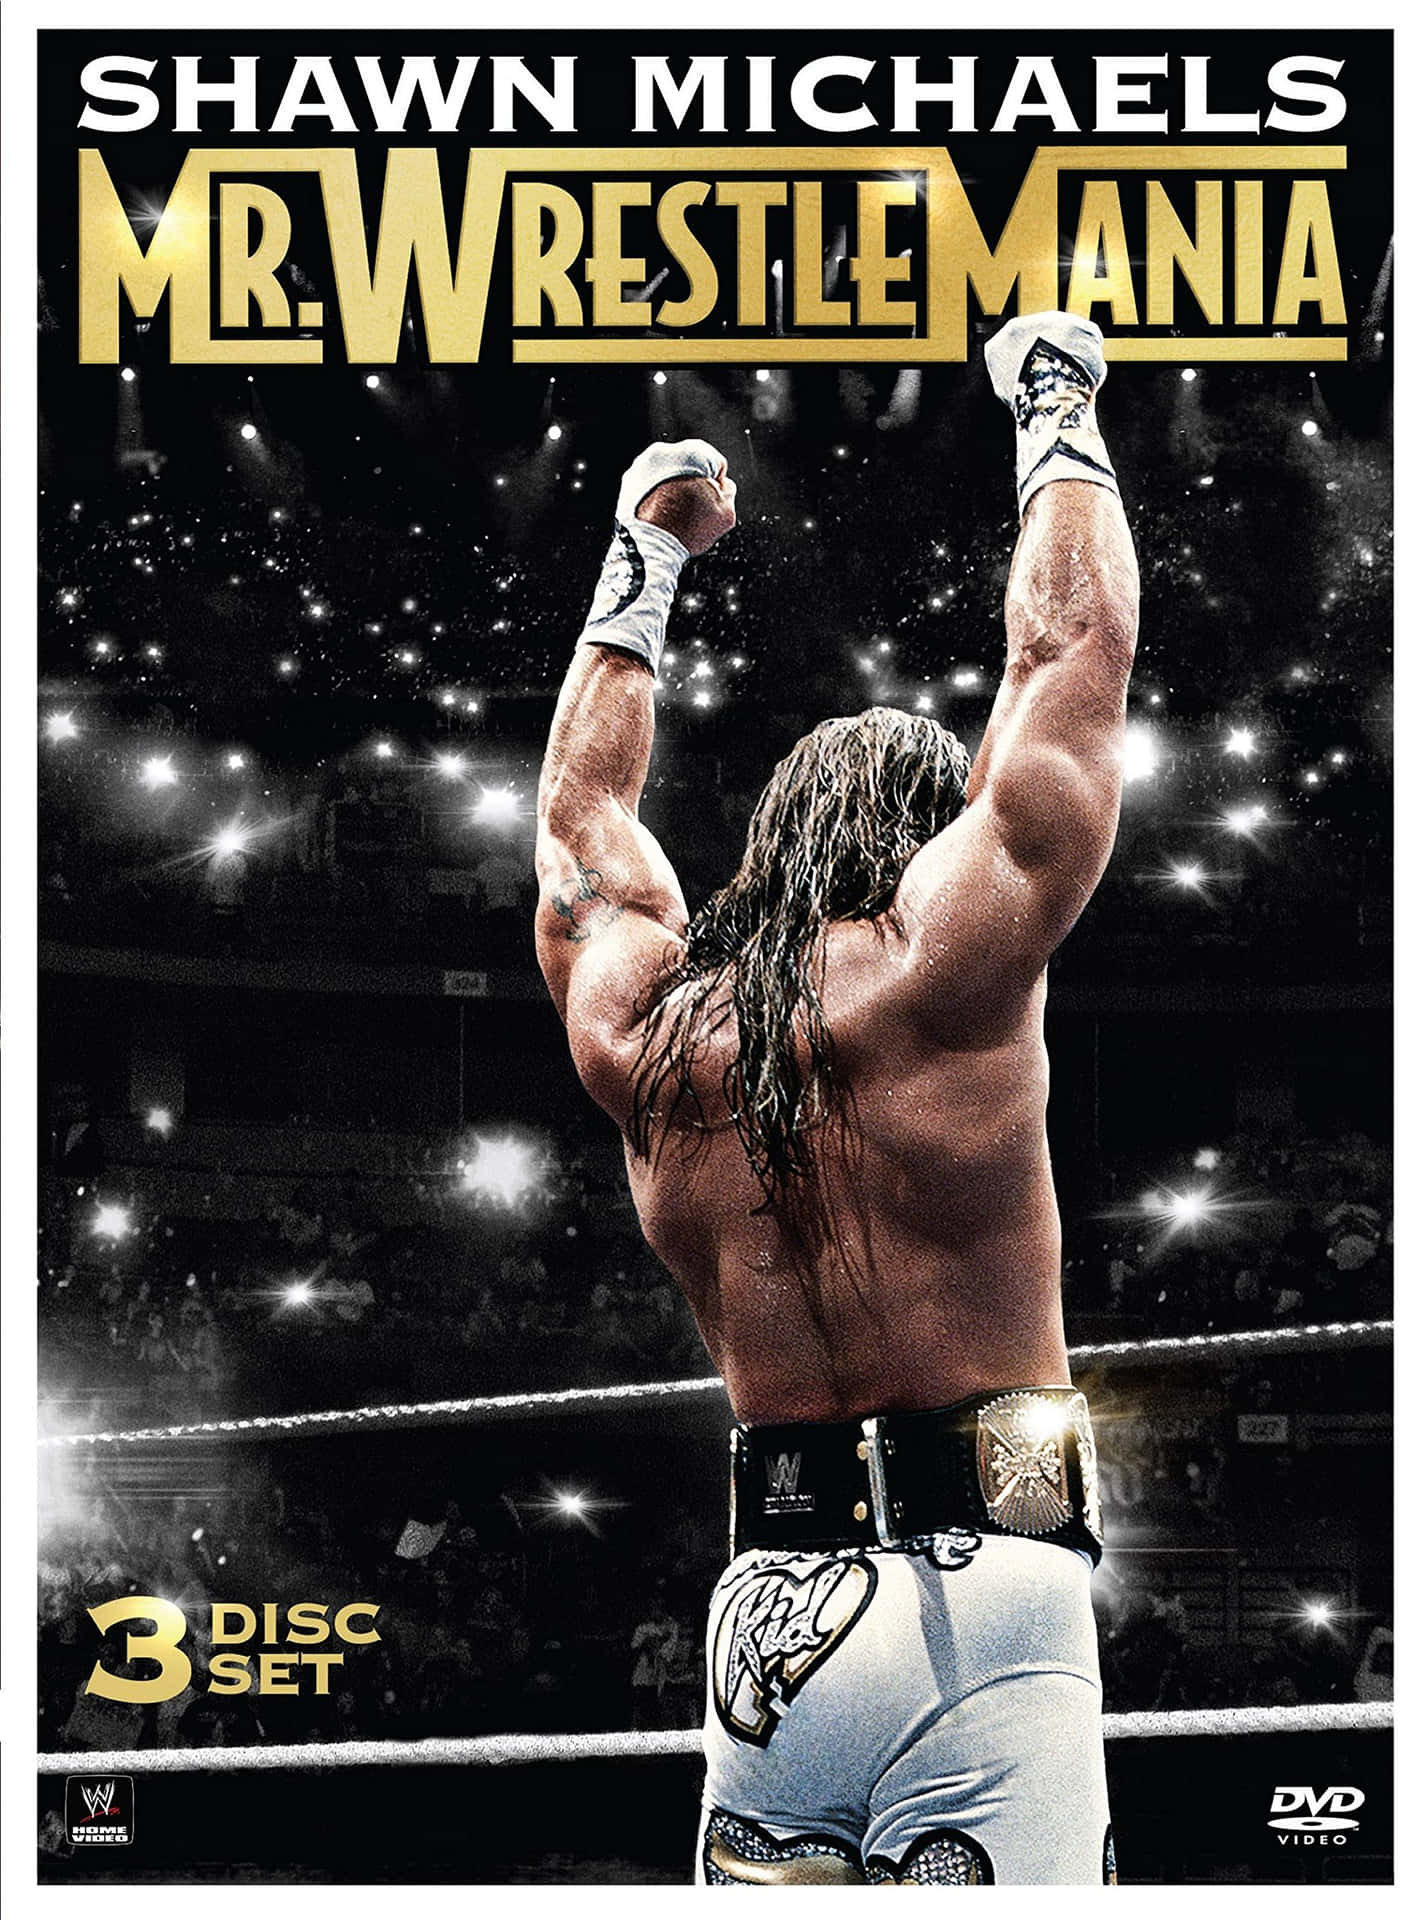 Legendary Wwe Star Shawn Michaels On Dvd Cover Background